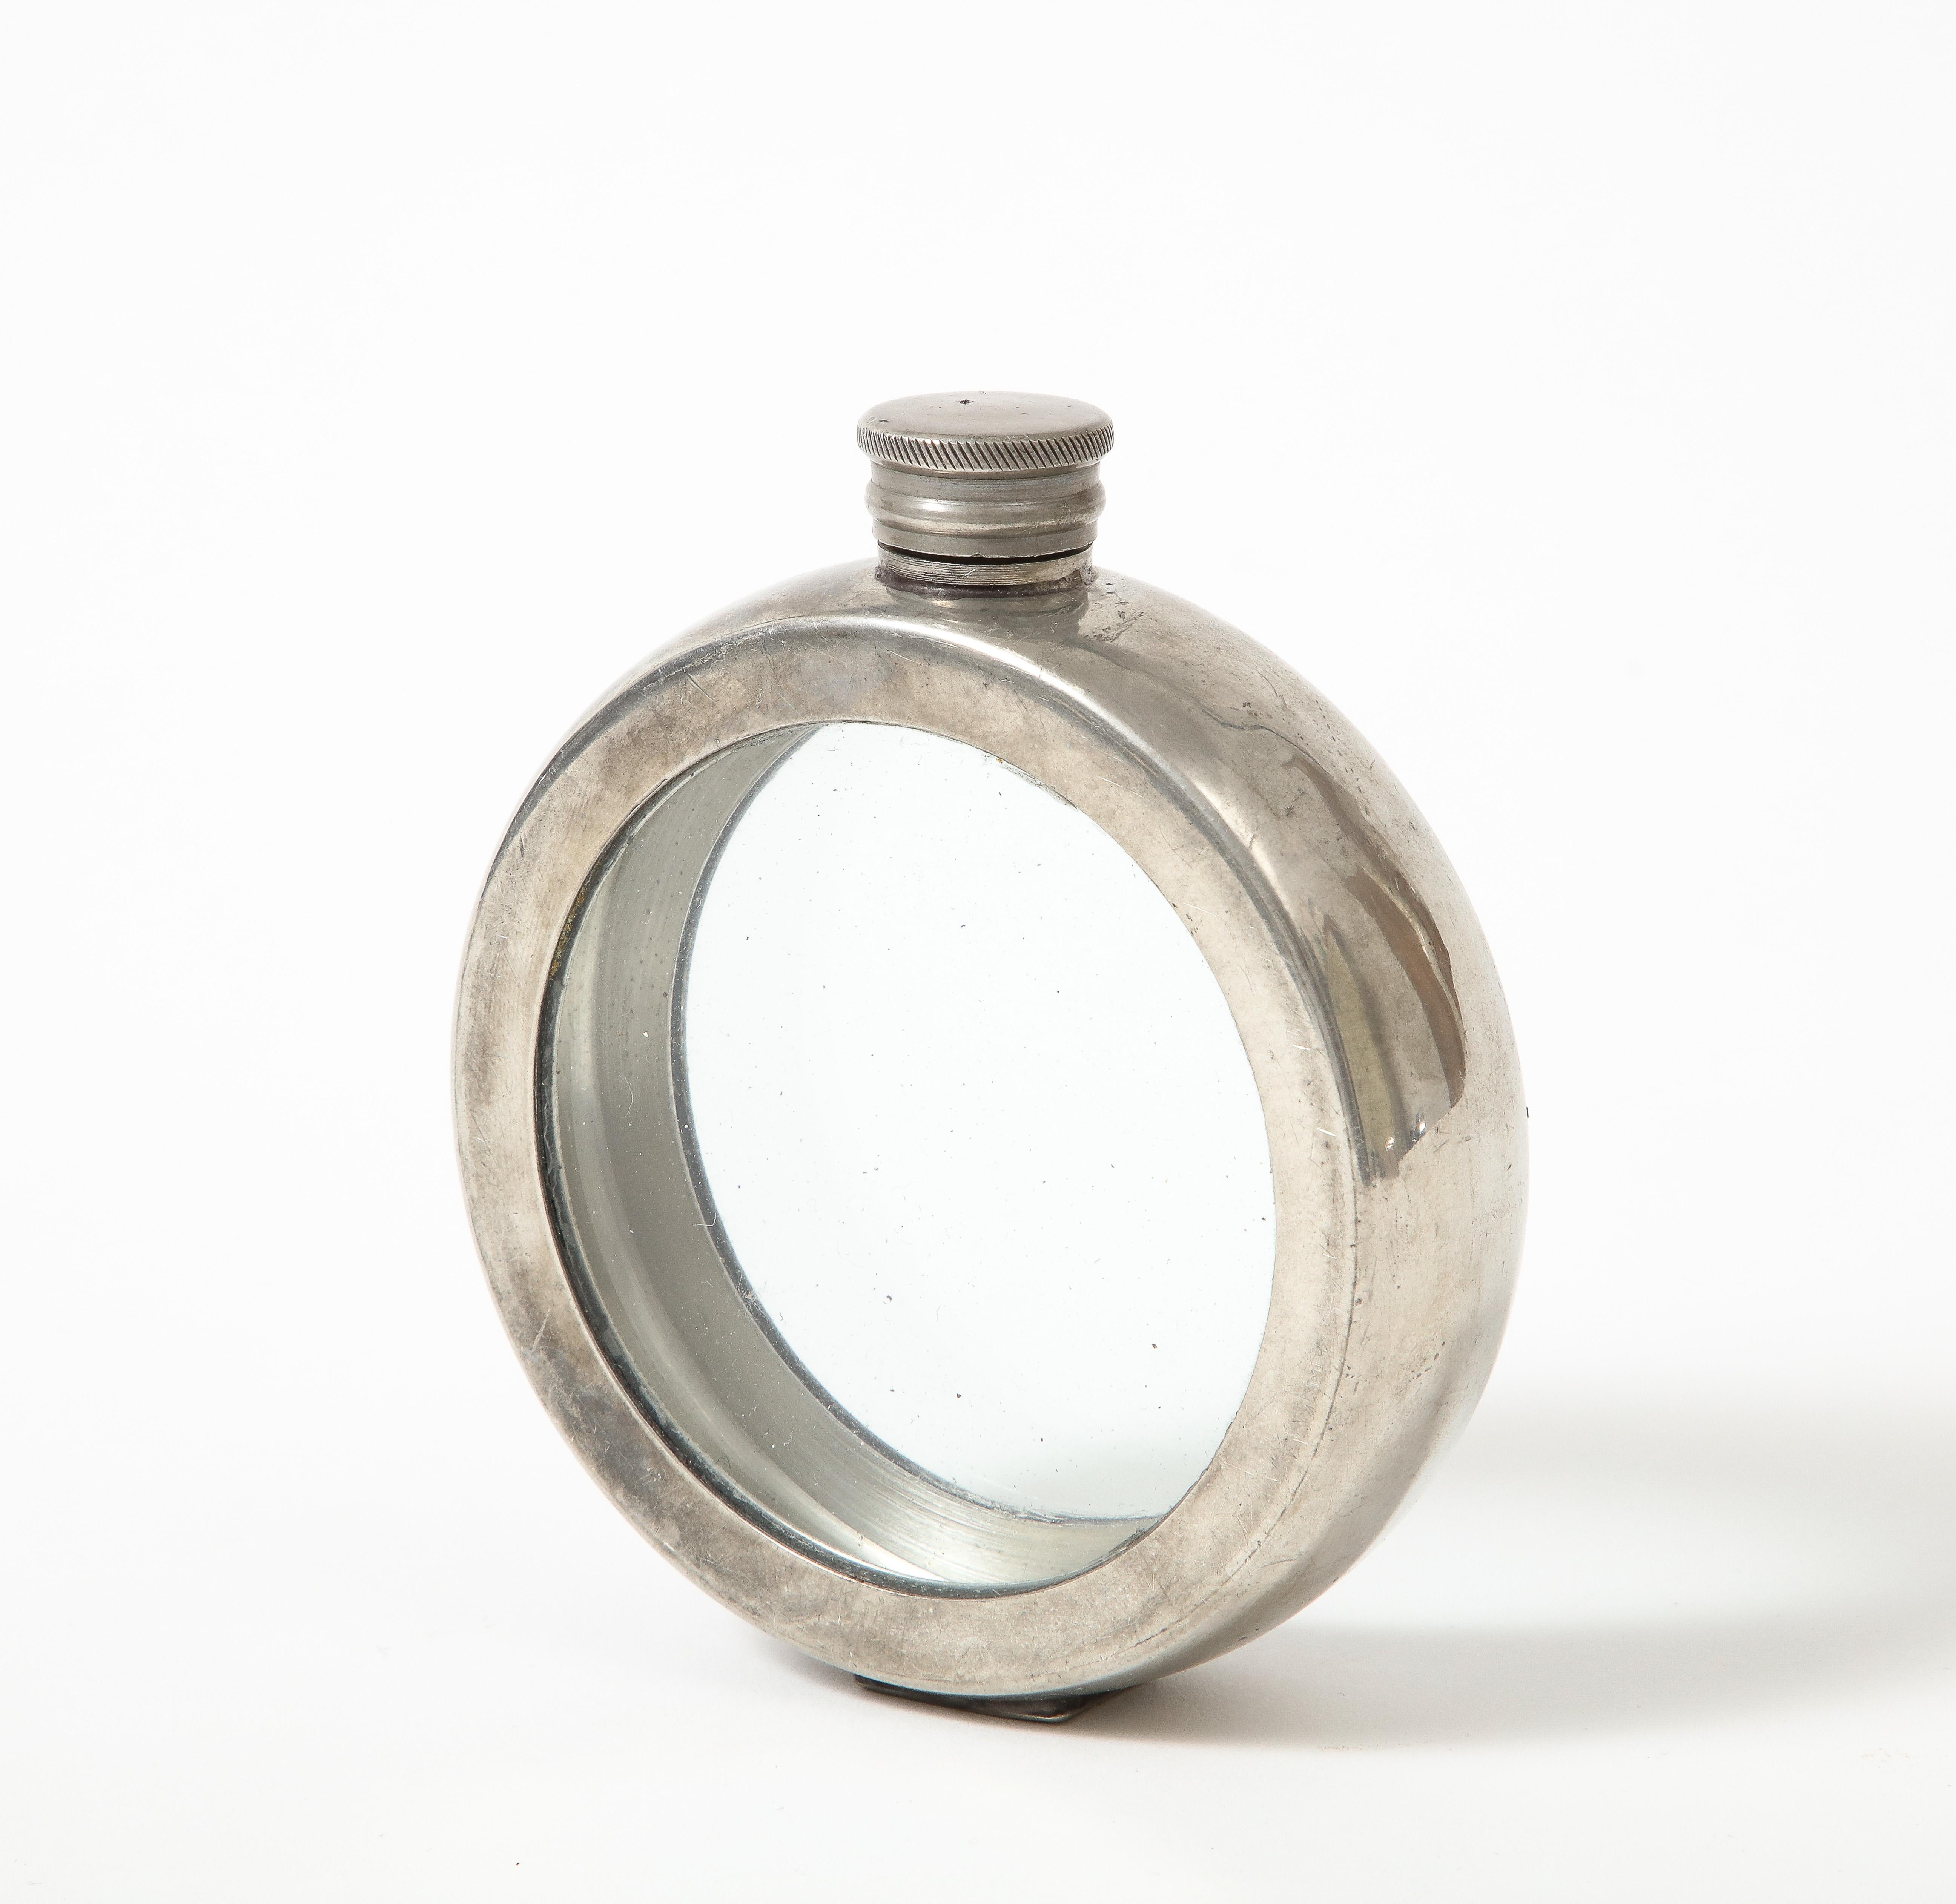 This  captivating object would be beautiful on a shelf.; smooth, reflective pewter wraps around a glass container. .